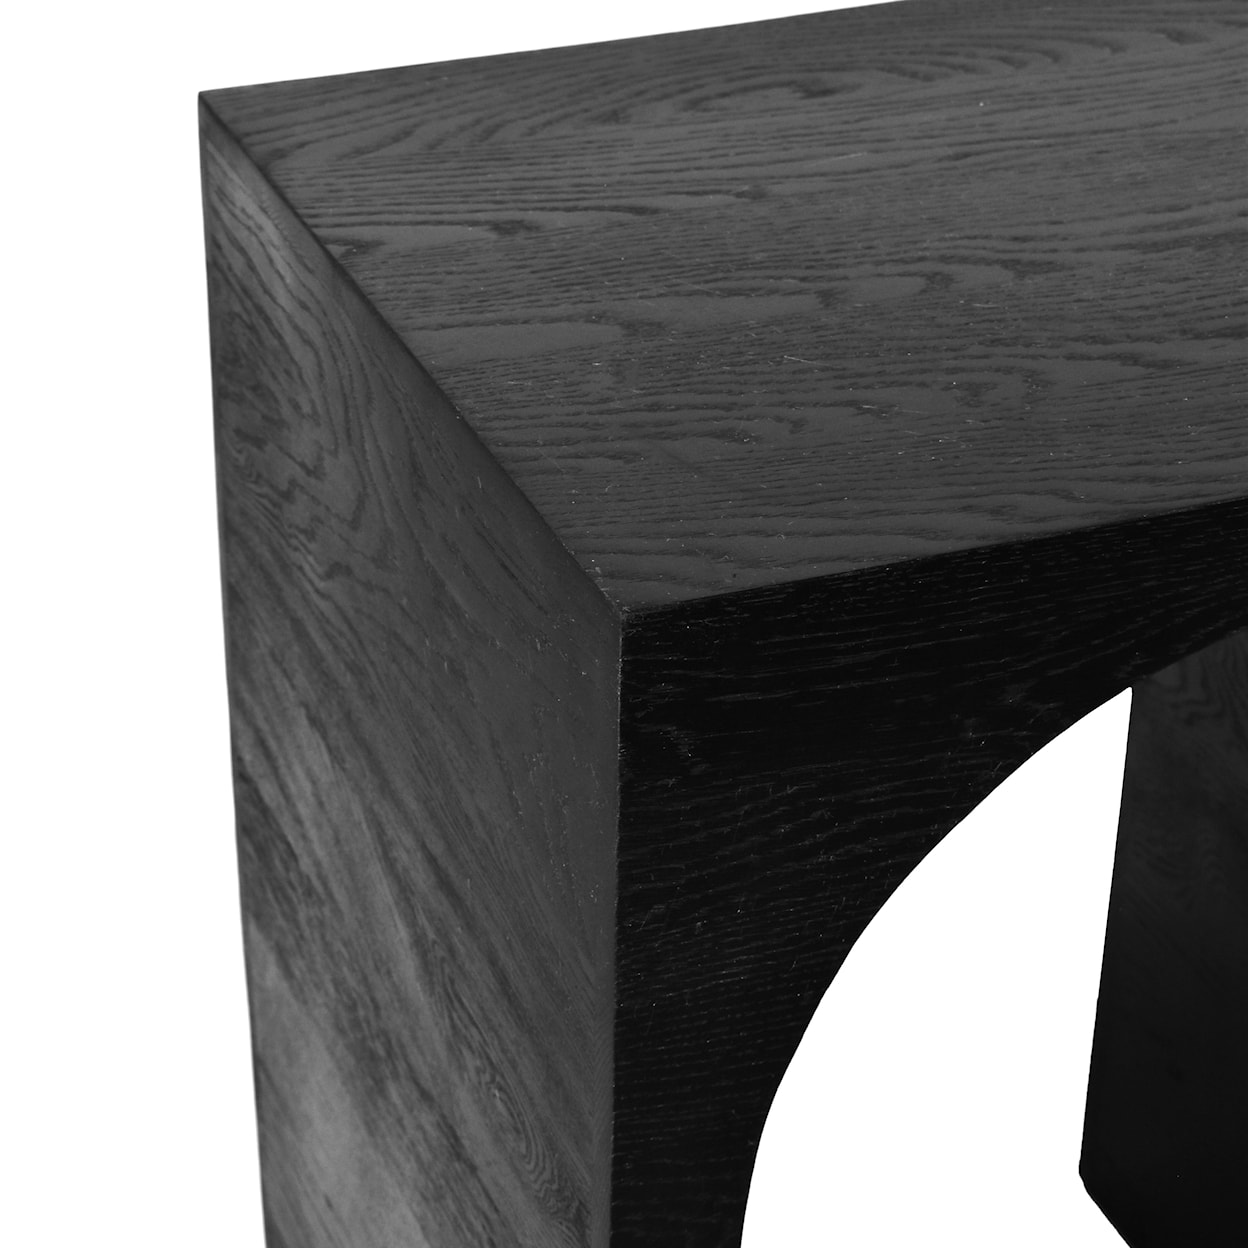 Meridian Furniture June Console Table